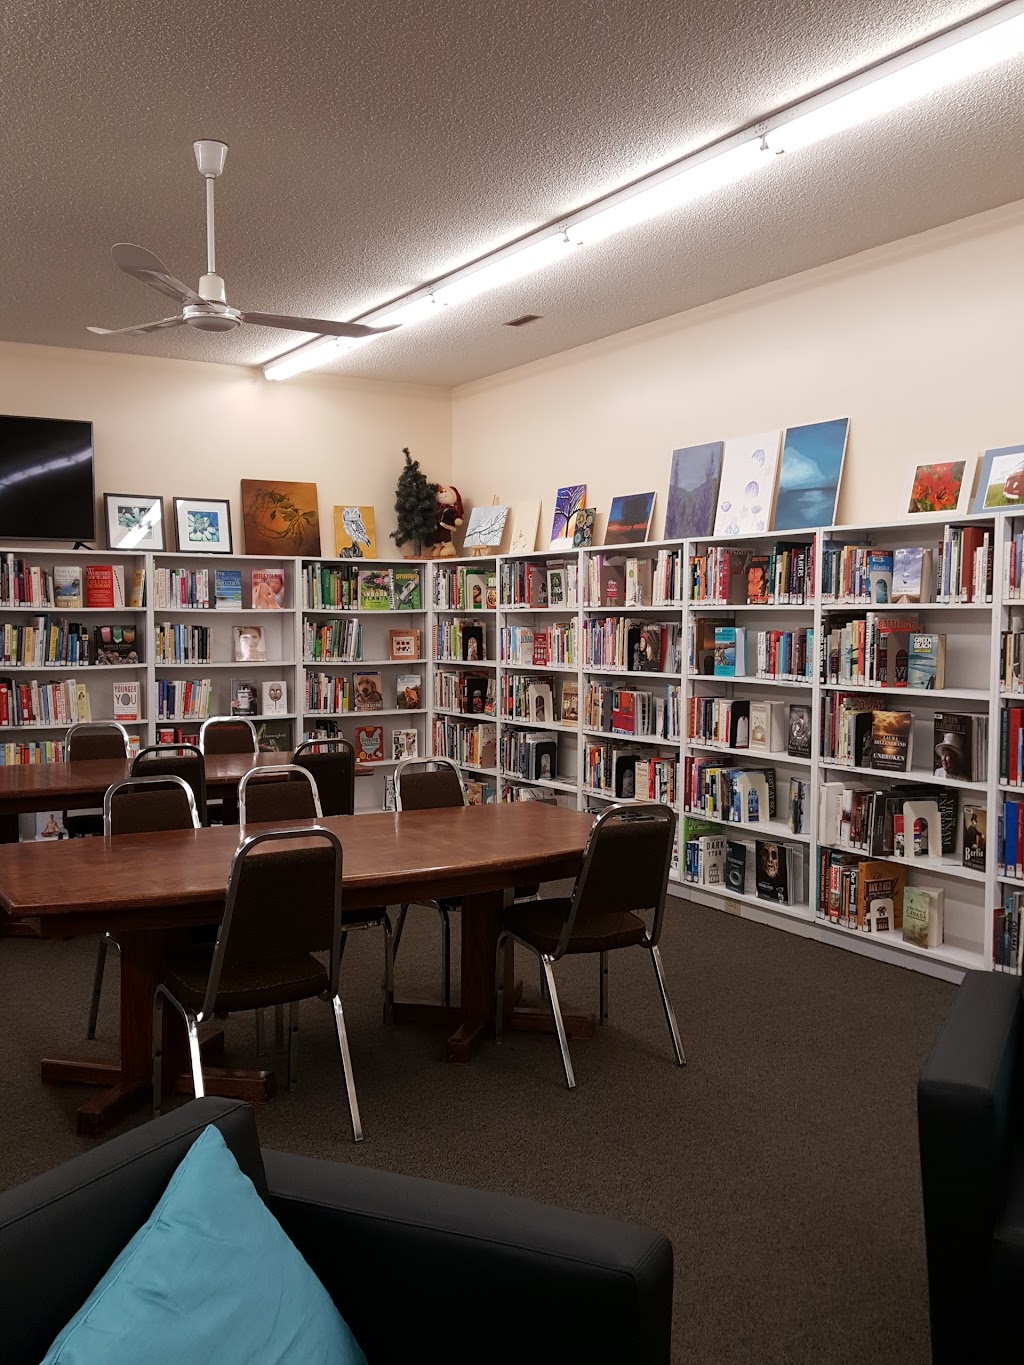 Mossbank Branch Public Library | library | 310 Main St, Mossbank, SK S0H 3G0, Canada | 3063542474 OR +1 306-354-2474